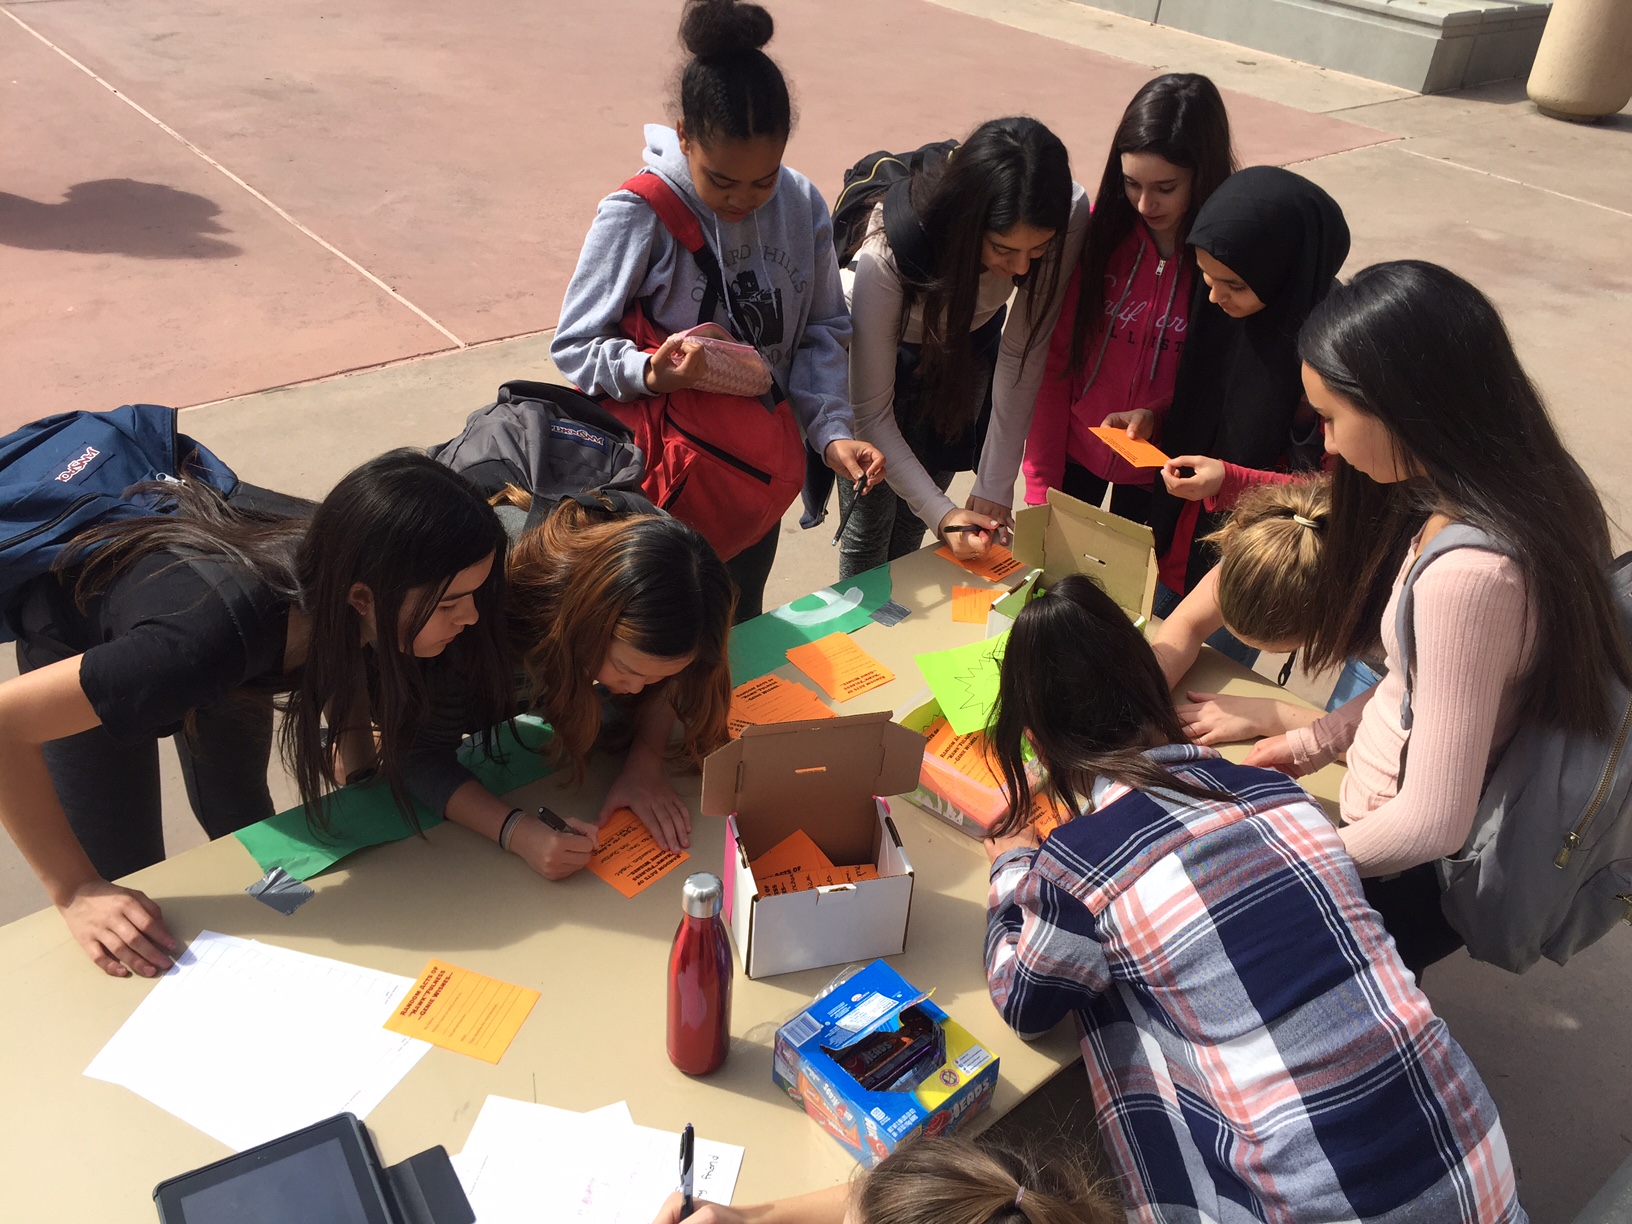 Students participating in kindness activities on campus